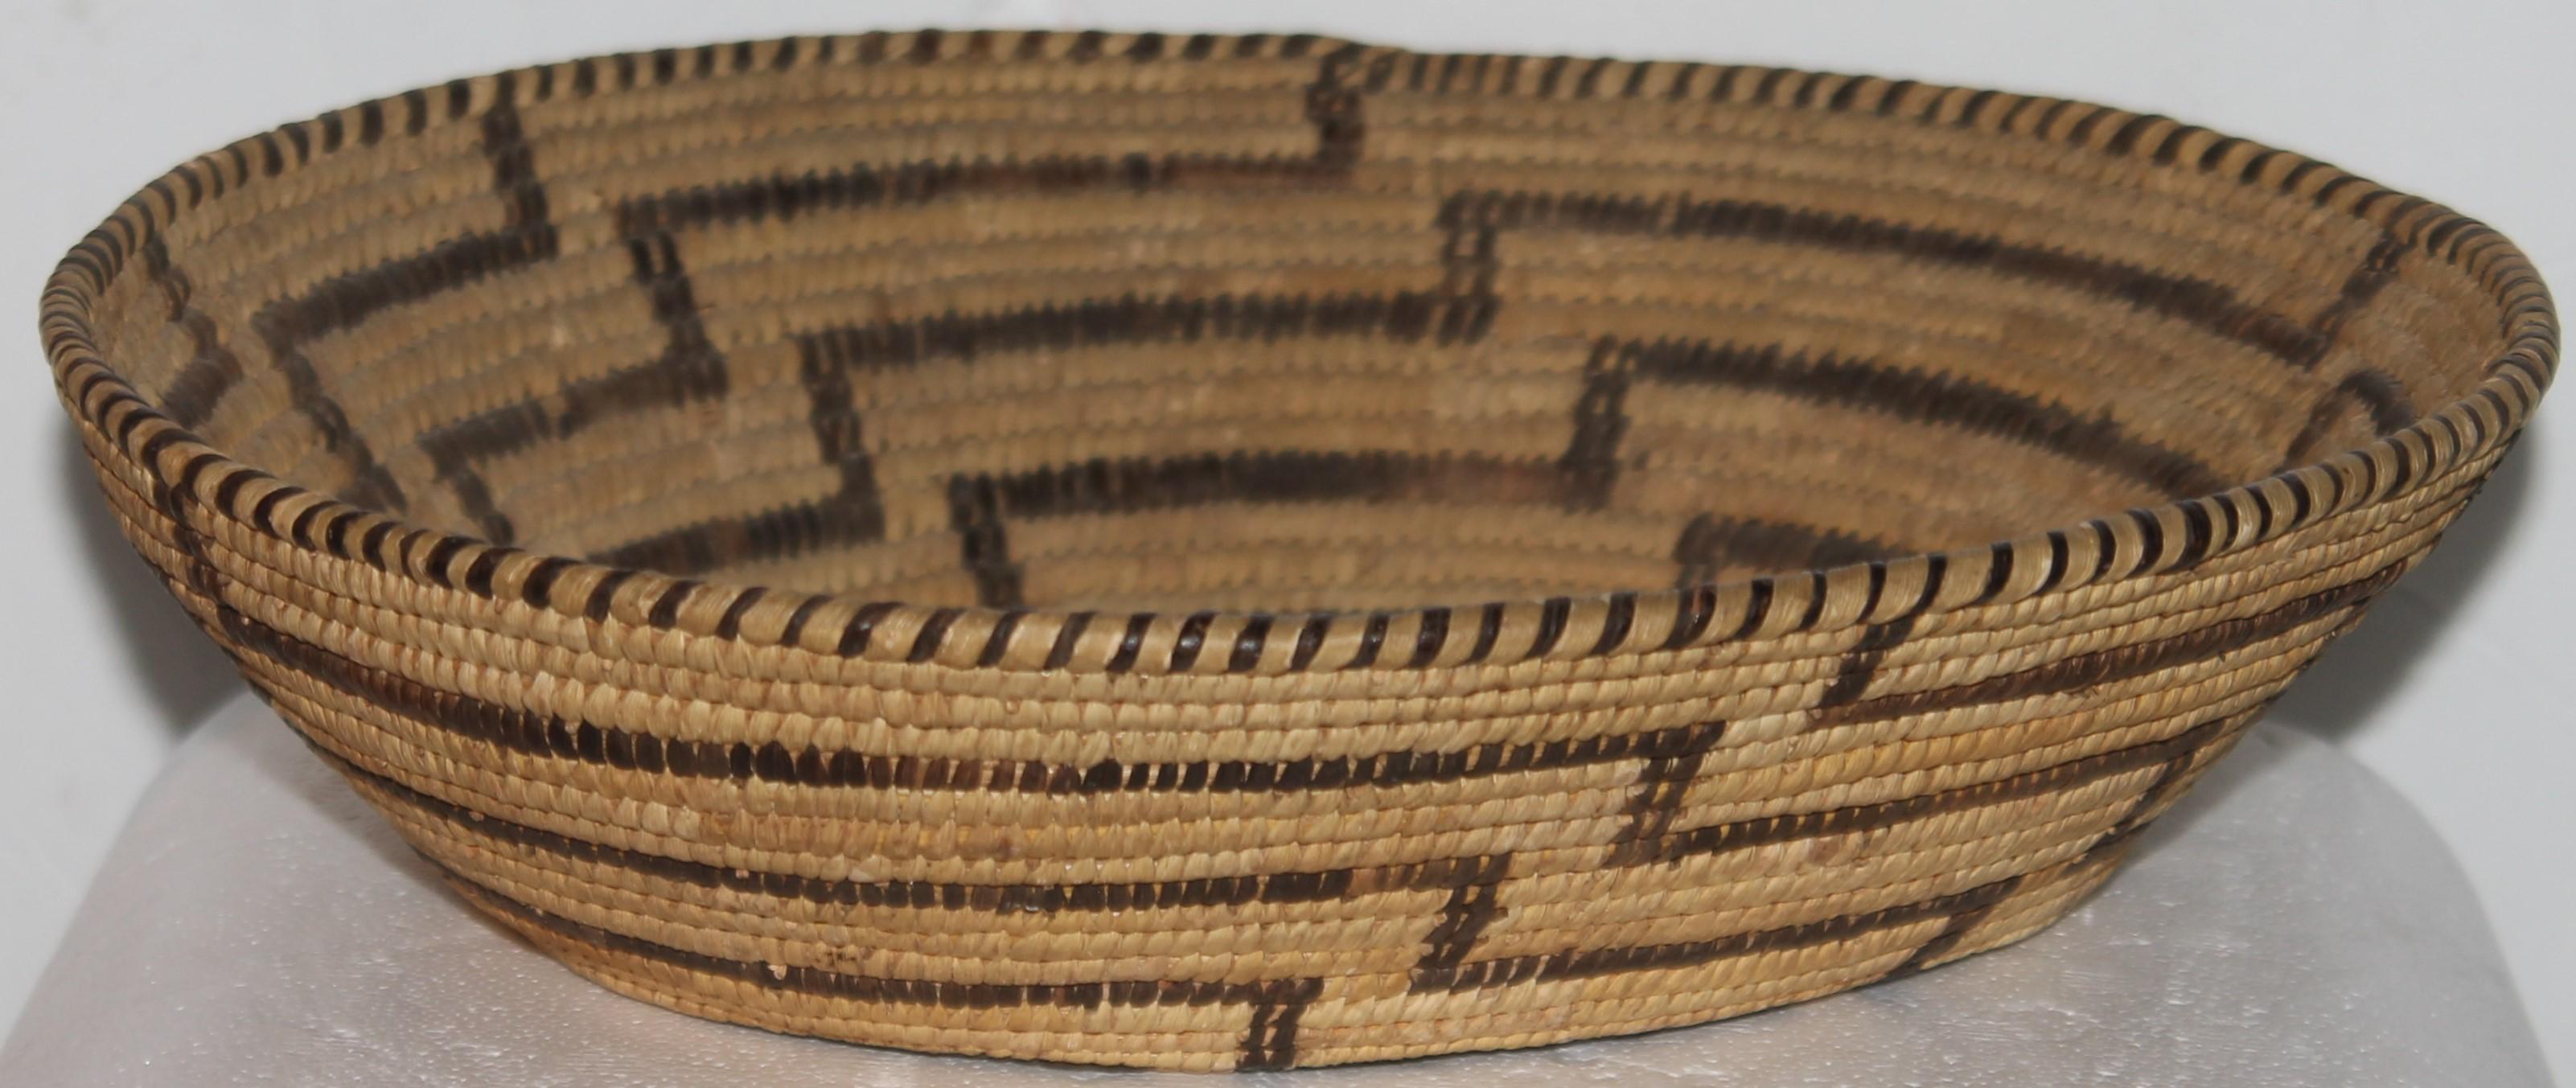 This fine Native American Indian Pima basket is in fine condition. Fantastic geometric pattern in very good condition.